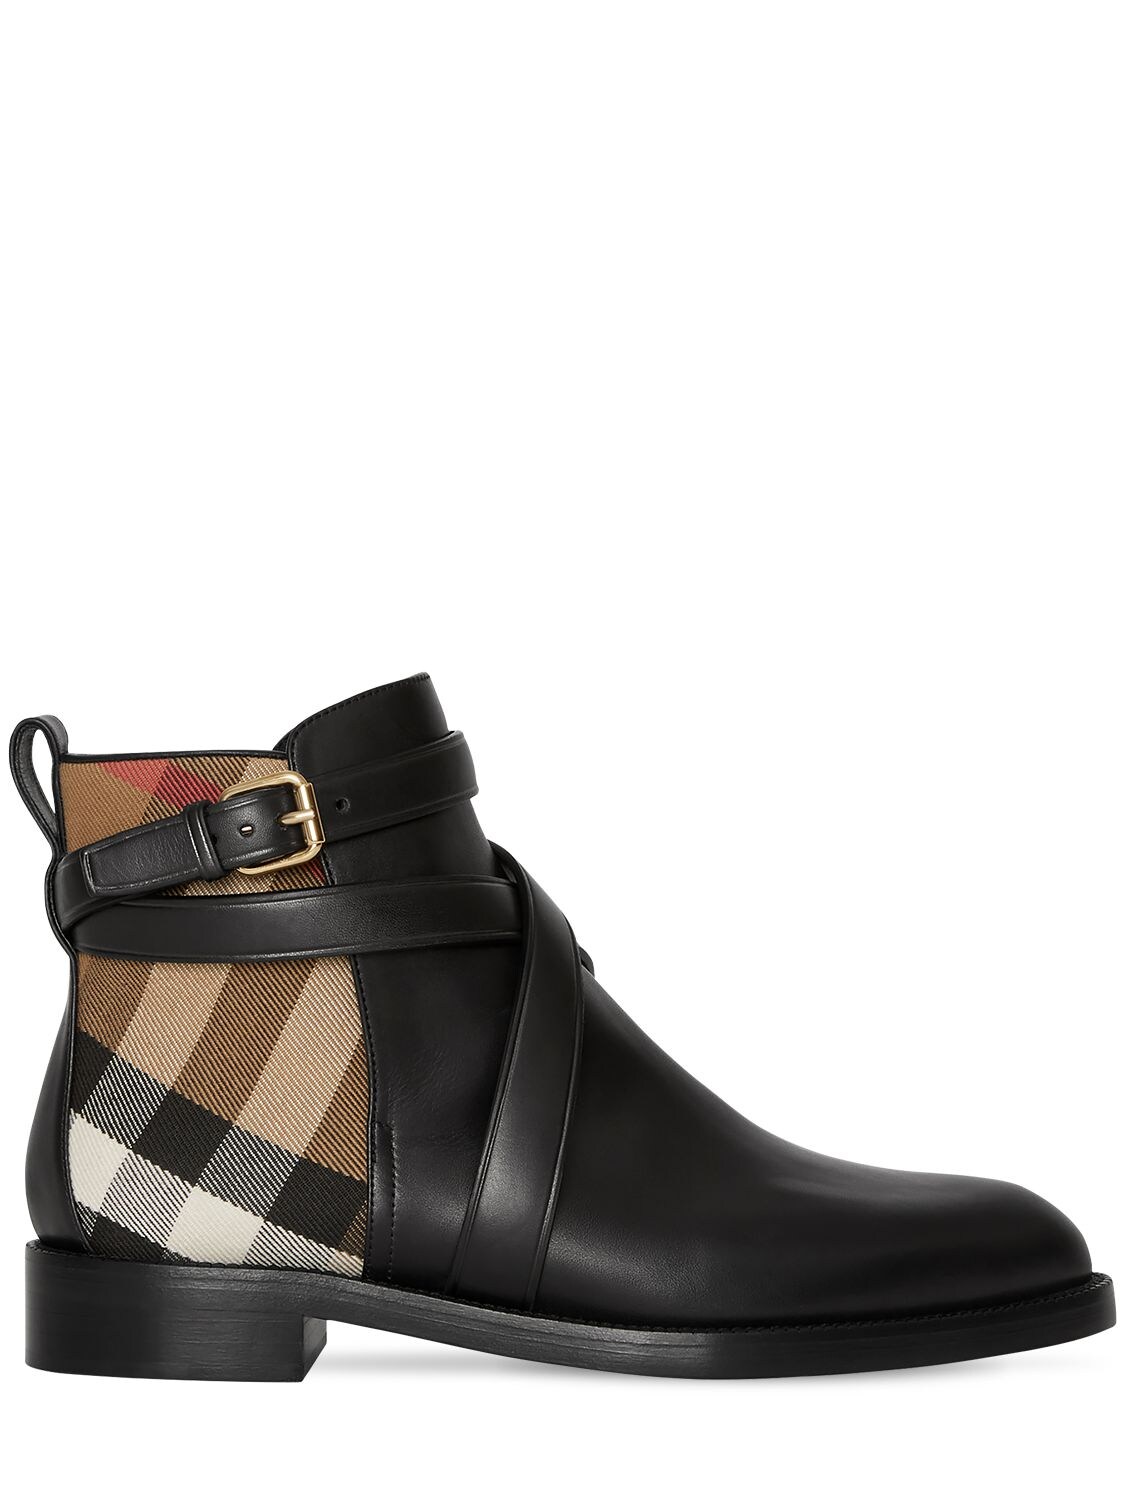 BURBERRY 20MM PRYLE LEATHER & CHECK BOOTS,69IG4S006-QTEXODK1